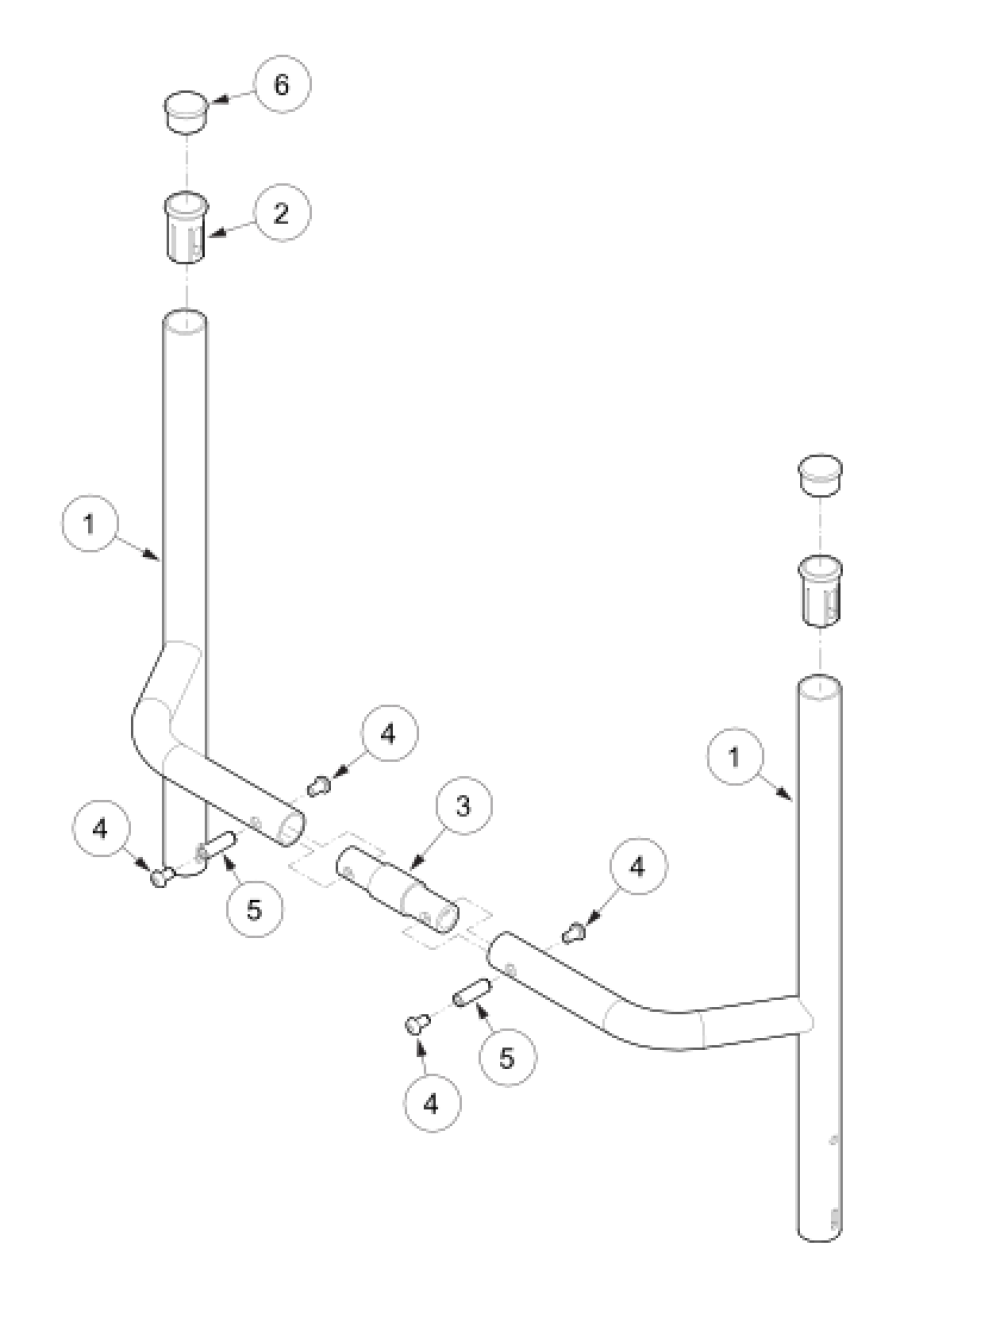 (discontinued) Rogue With Xp Option Fixed Height Backrest With Non-adjustable Rigidizer Bar parts diagram